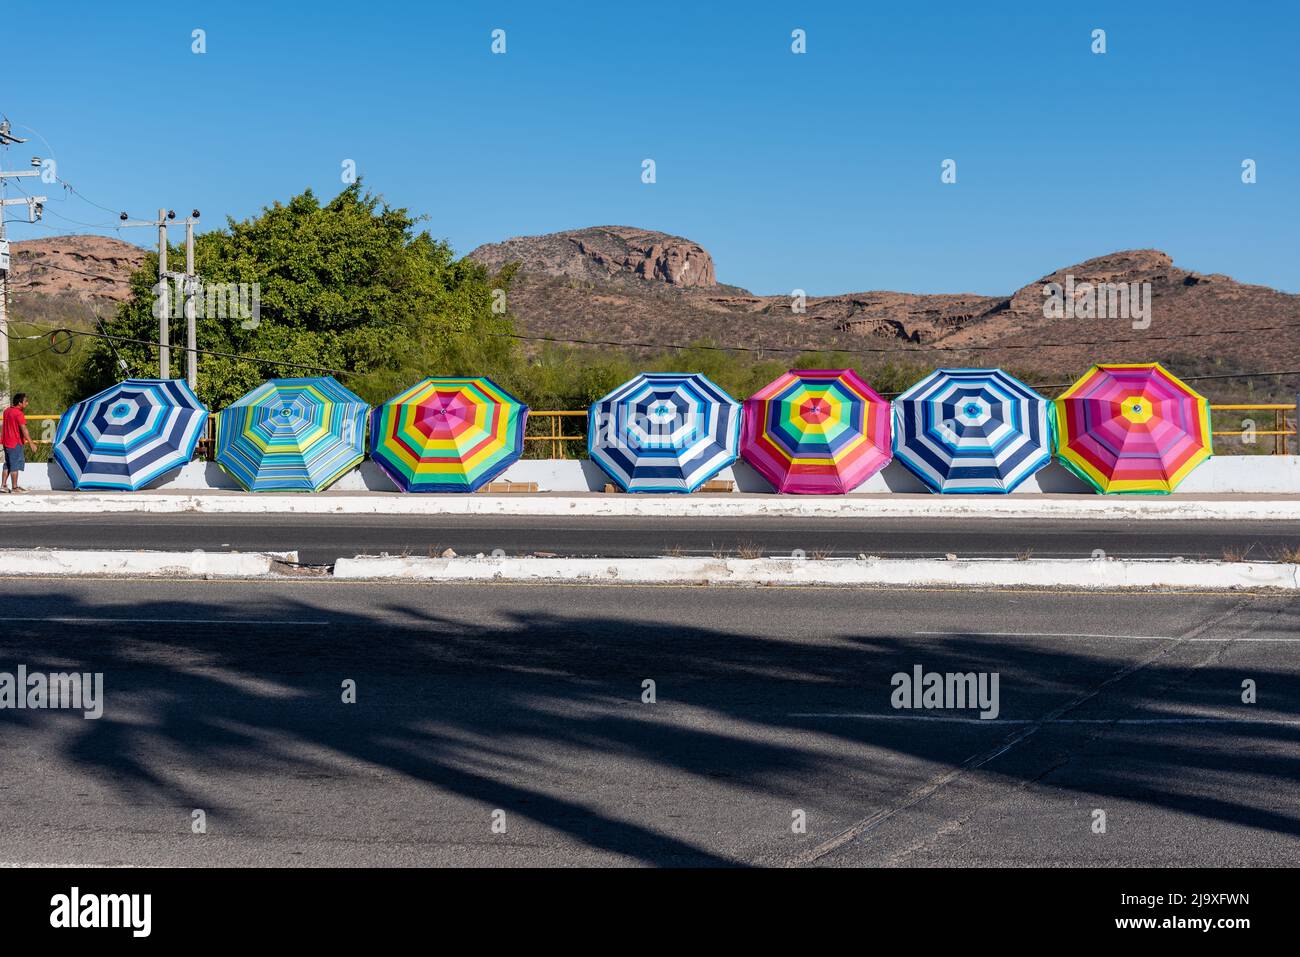 Long line of large colorful striped oversized umbrellas for sun protection displayed open on a sidewalk in the desert of San Carlos, Sonora, Mexico. Stock Photo